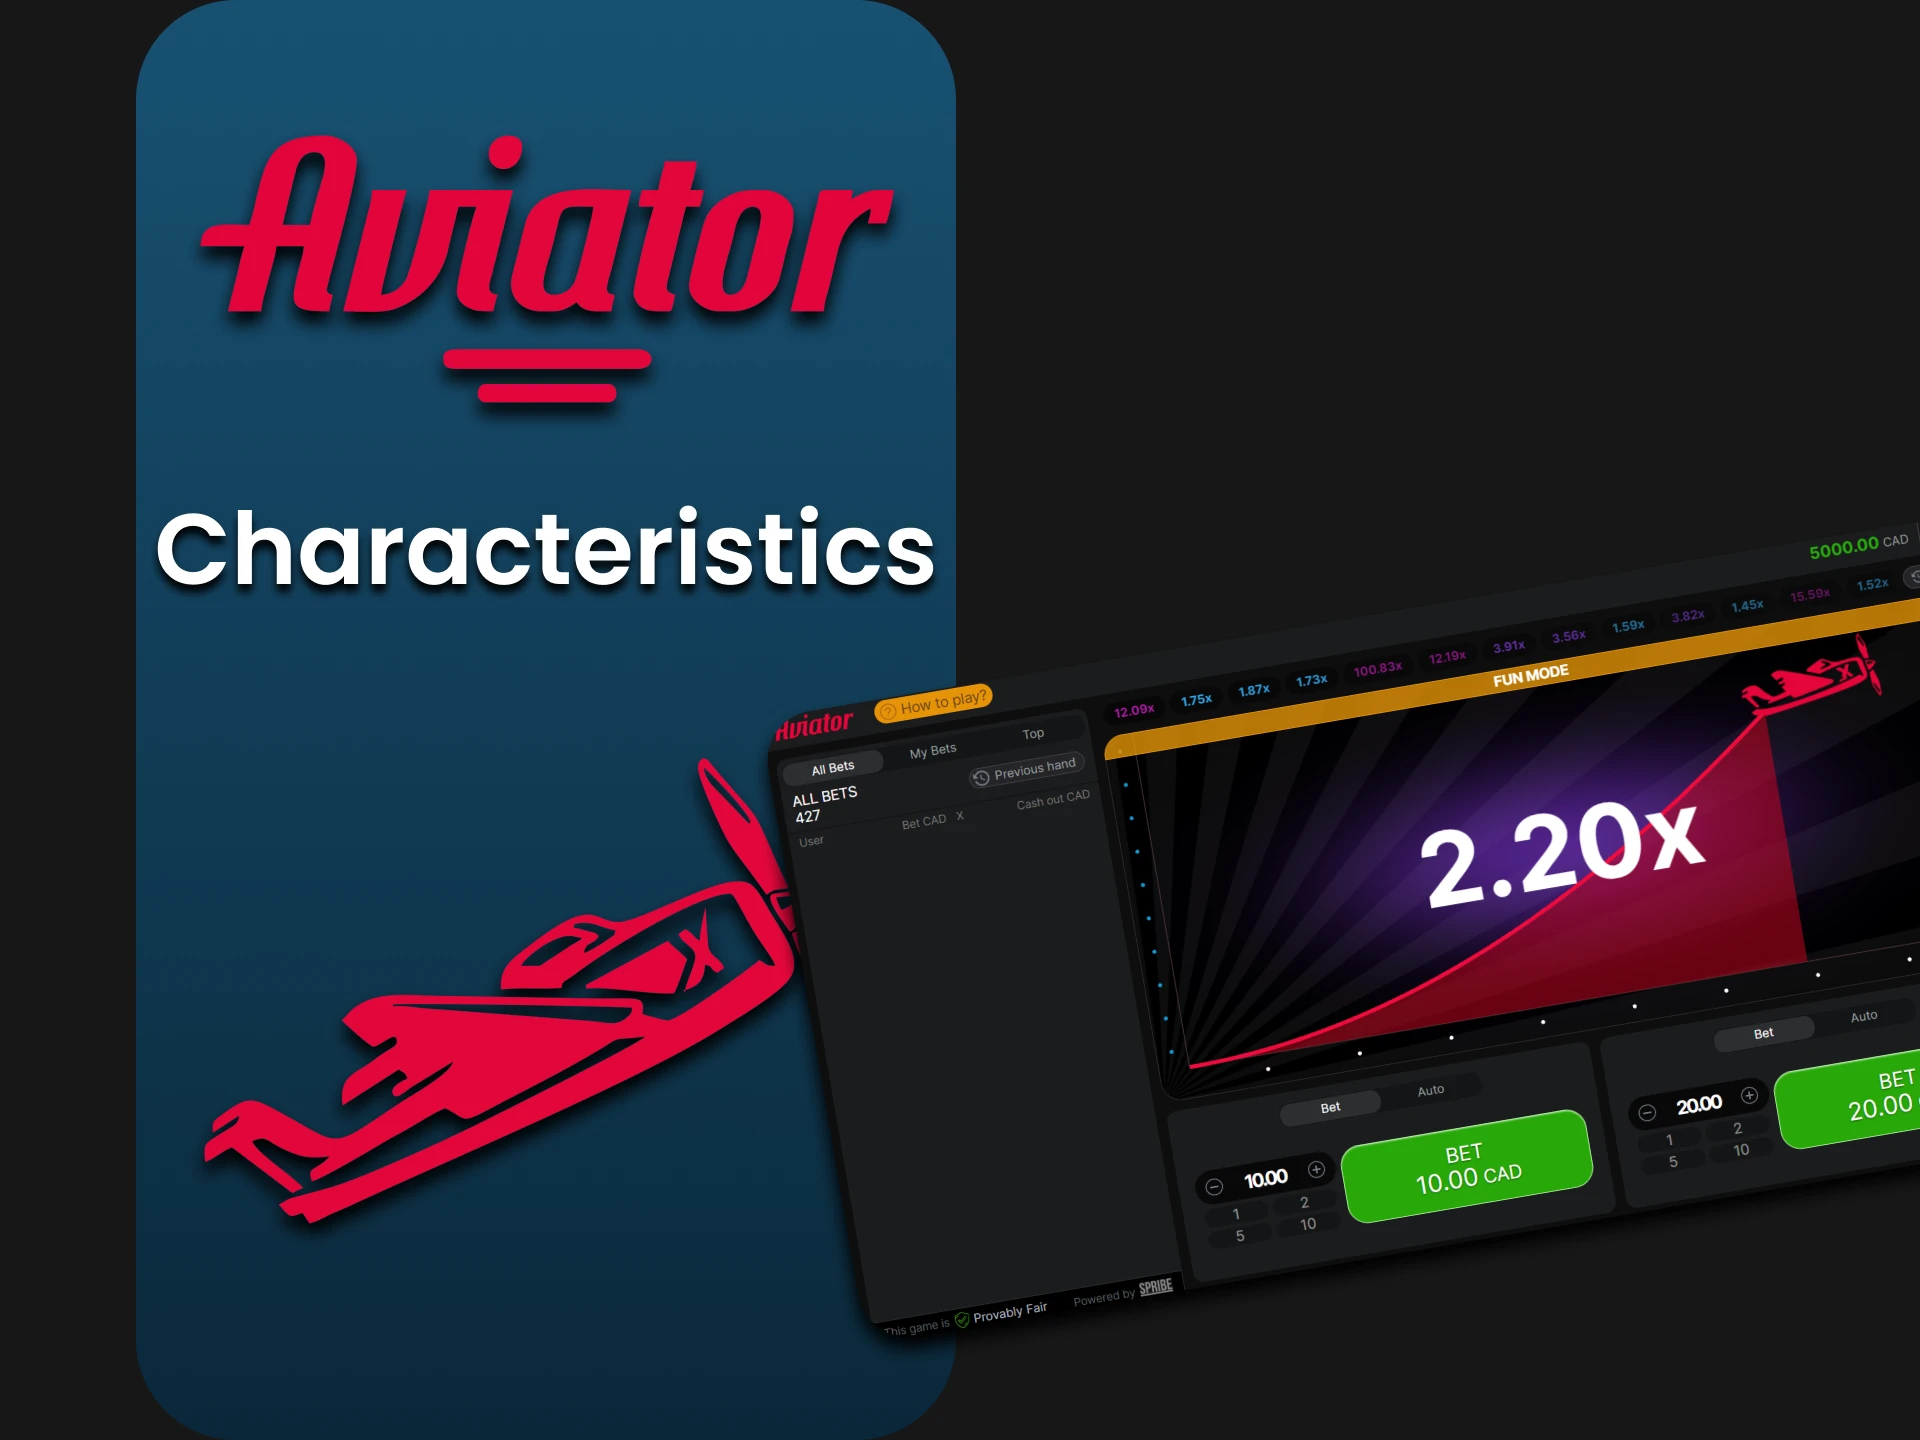 Study the characteristics of the Aviator game.